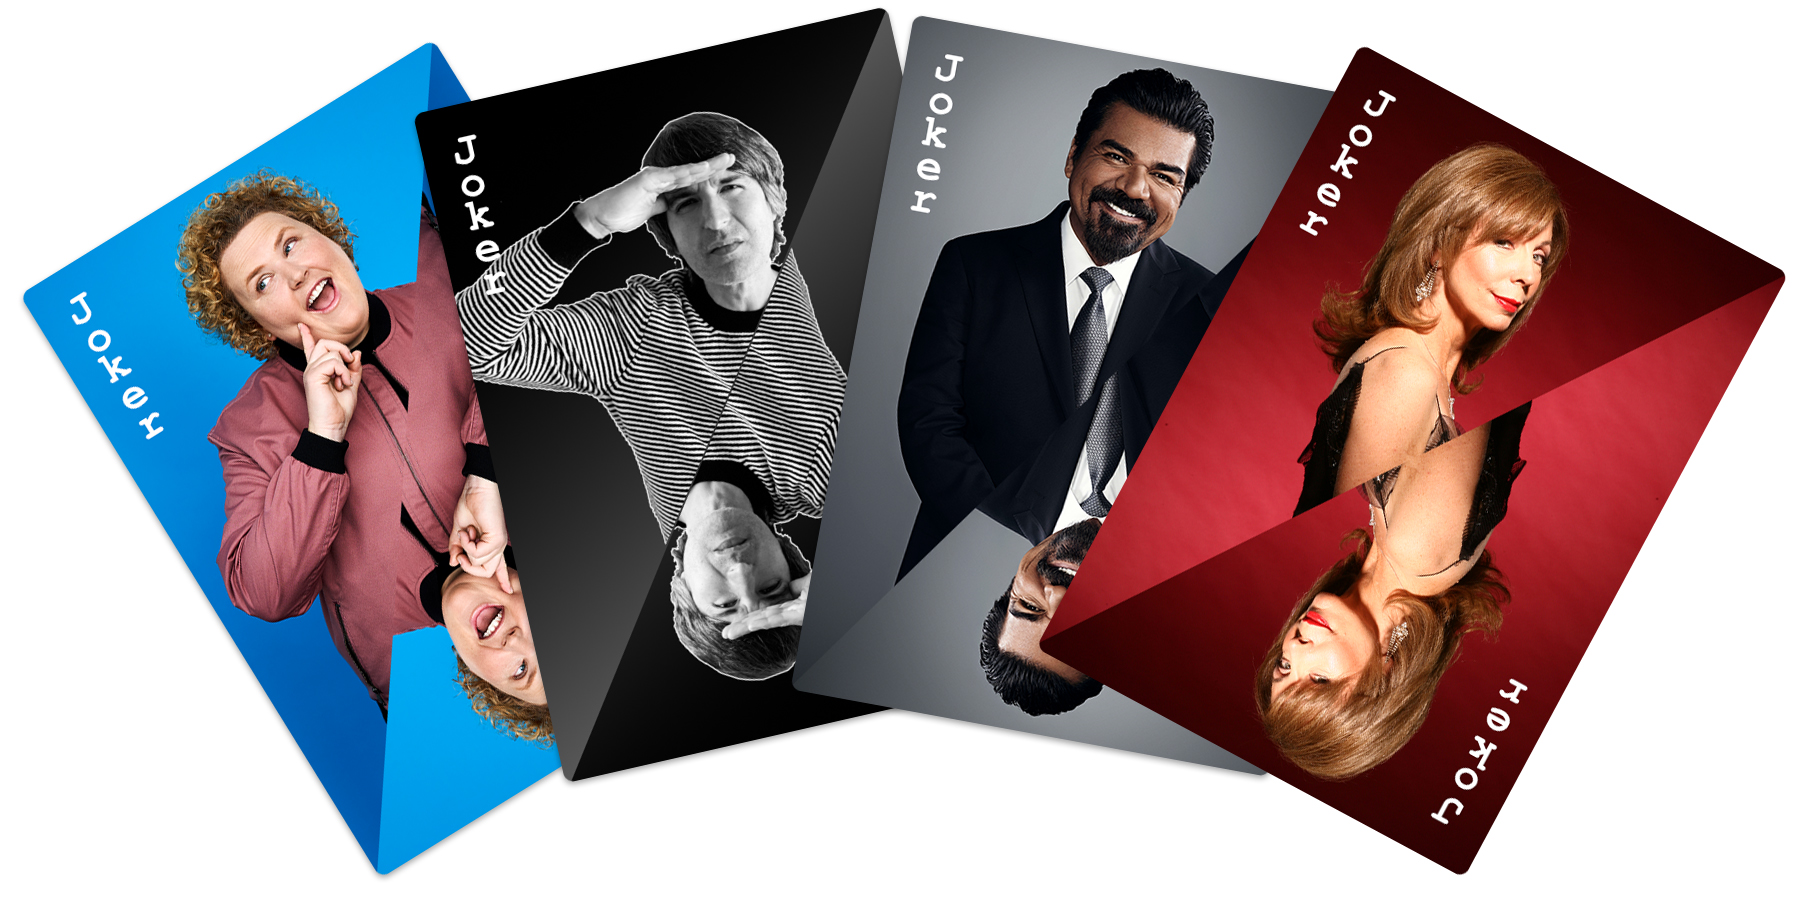 Fortune Feimster, Dmitri Martin, George Lopez and Rita Rudner depicted as Joker playing cards.